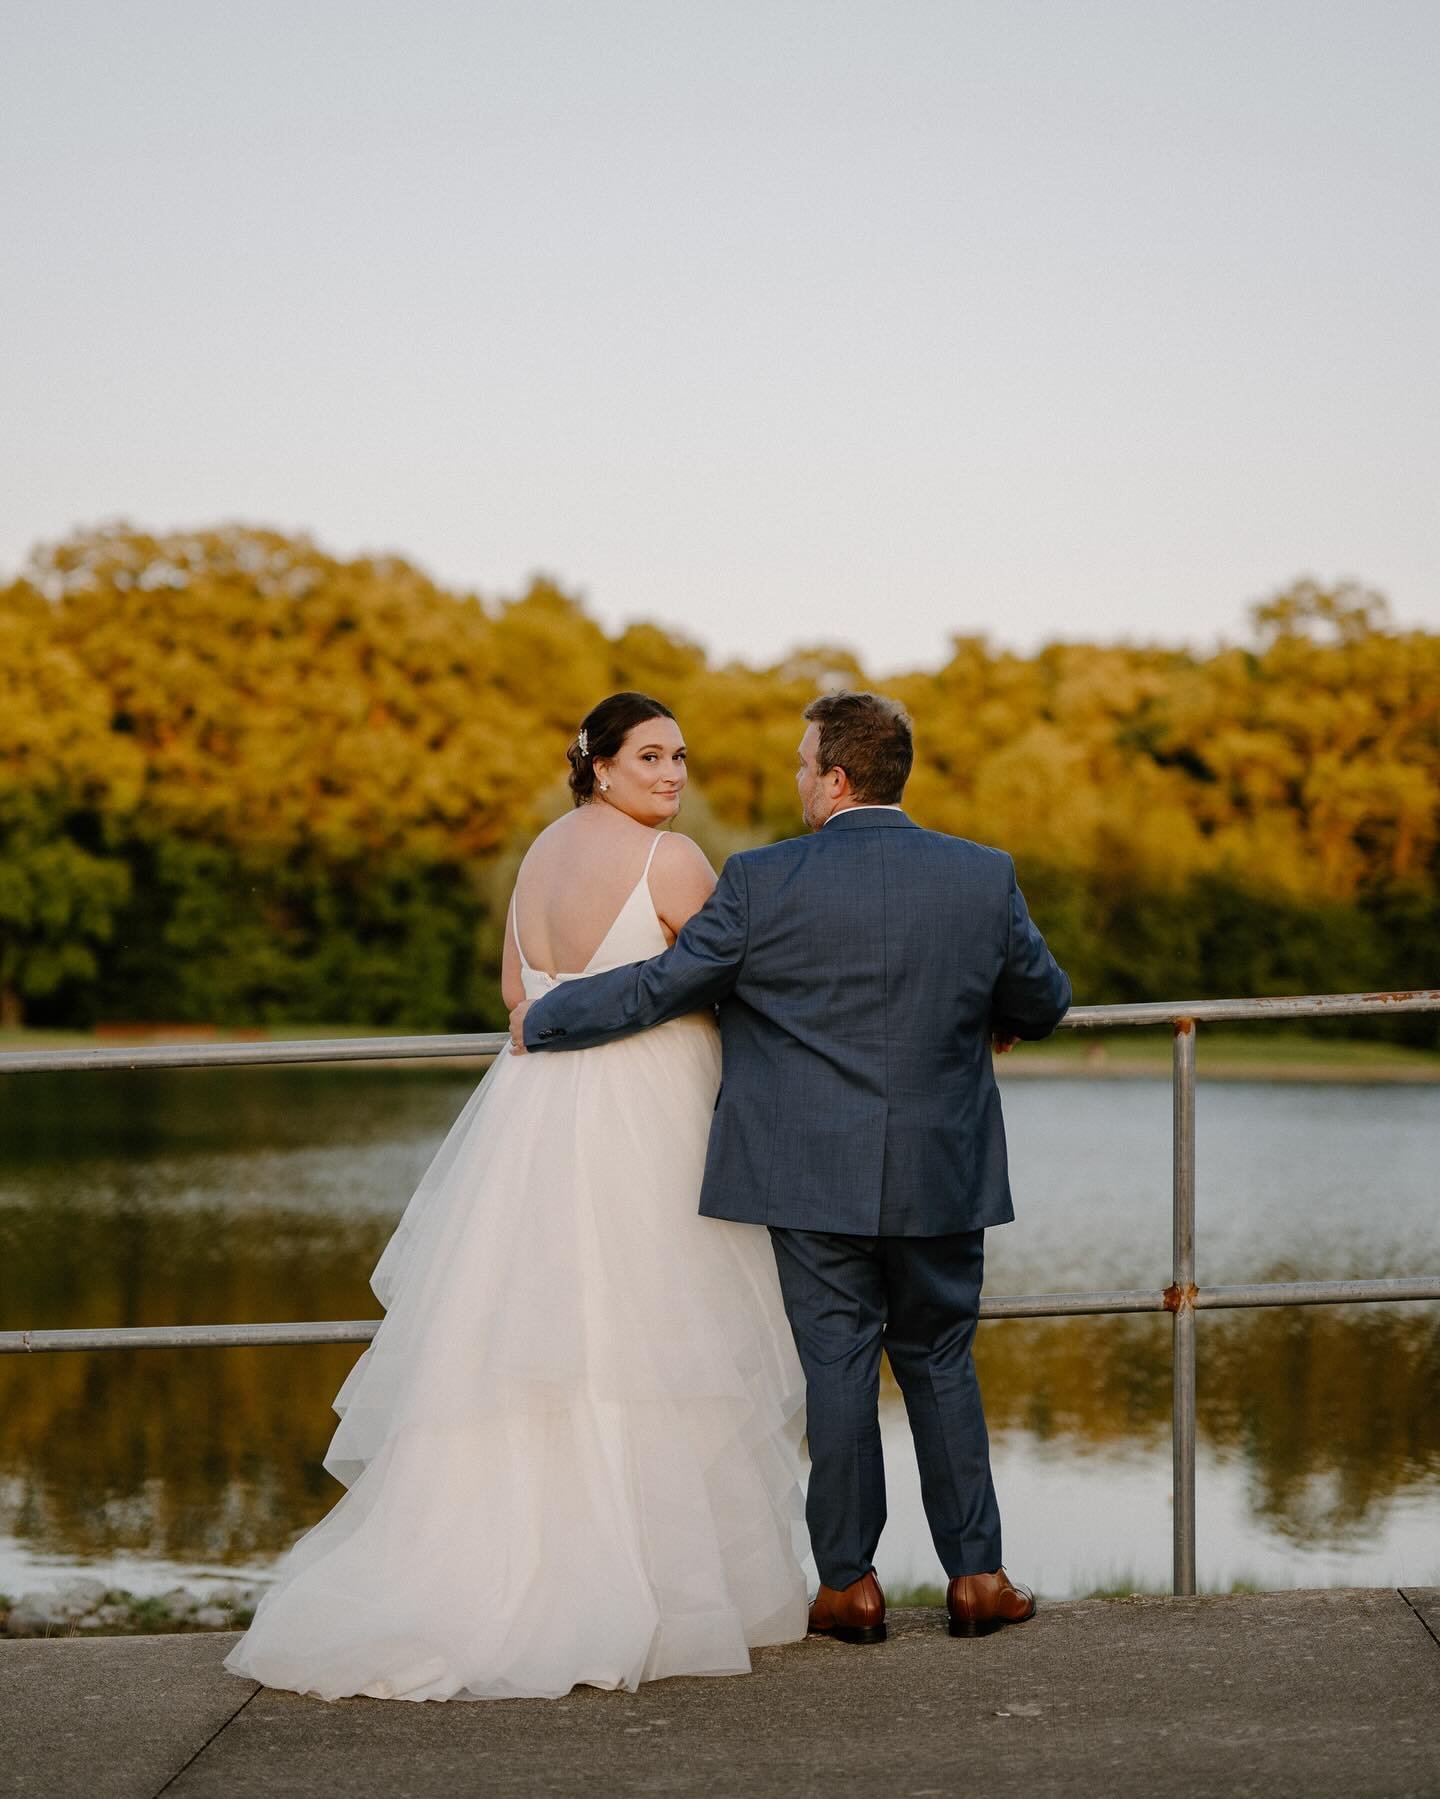 Andrea &amp; Kyle✨
May 11th, 2024 

That&rsquo;s a wrap to my May weddings! This camp girl loveddd shooting at Camp Red Cedar! The sunset over the lake was just killer. Such a fun day celebrating Andrea &amp; Kyle ✨

Venue: @thelodgeatcrc 
Flowers: @